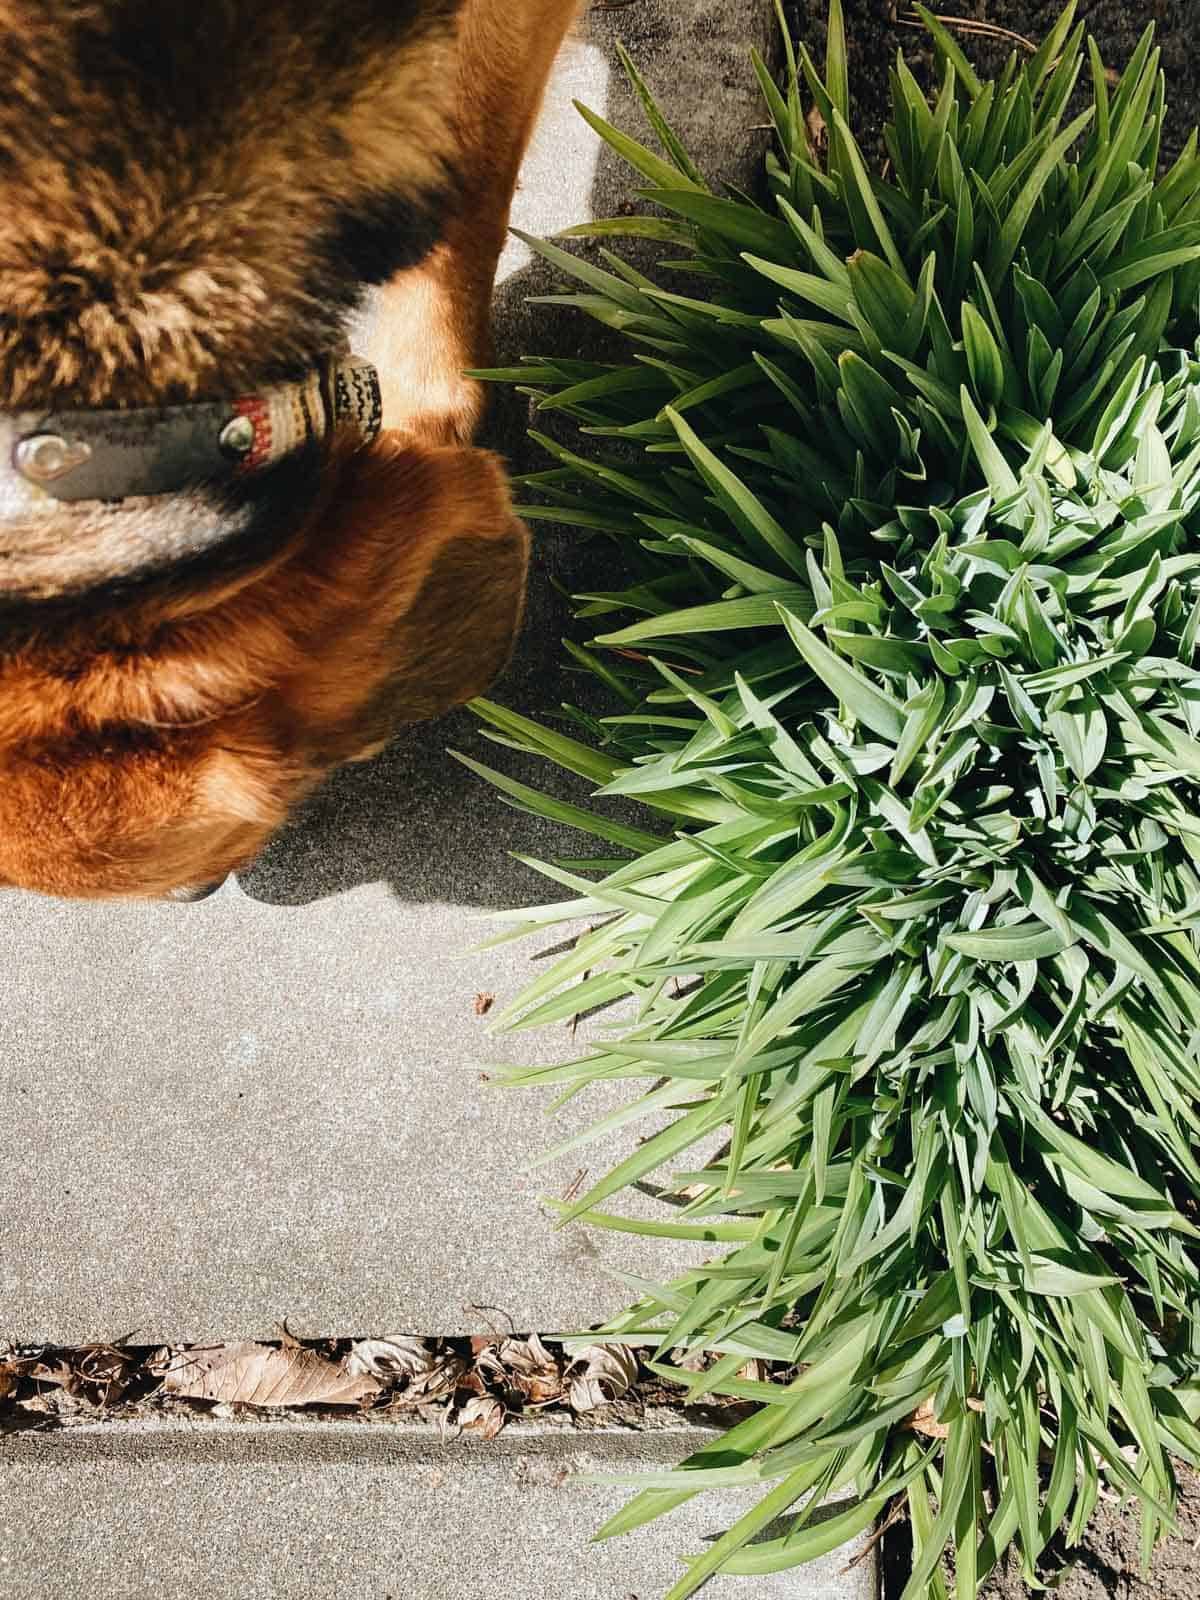 A dog sniffing the ground next to a grassy bush.